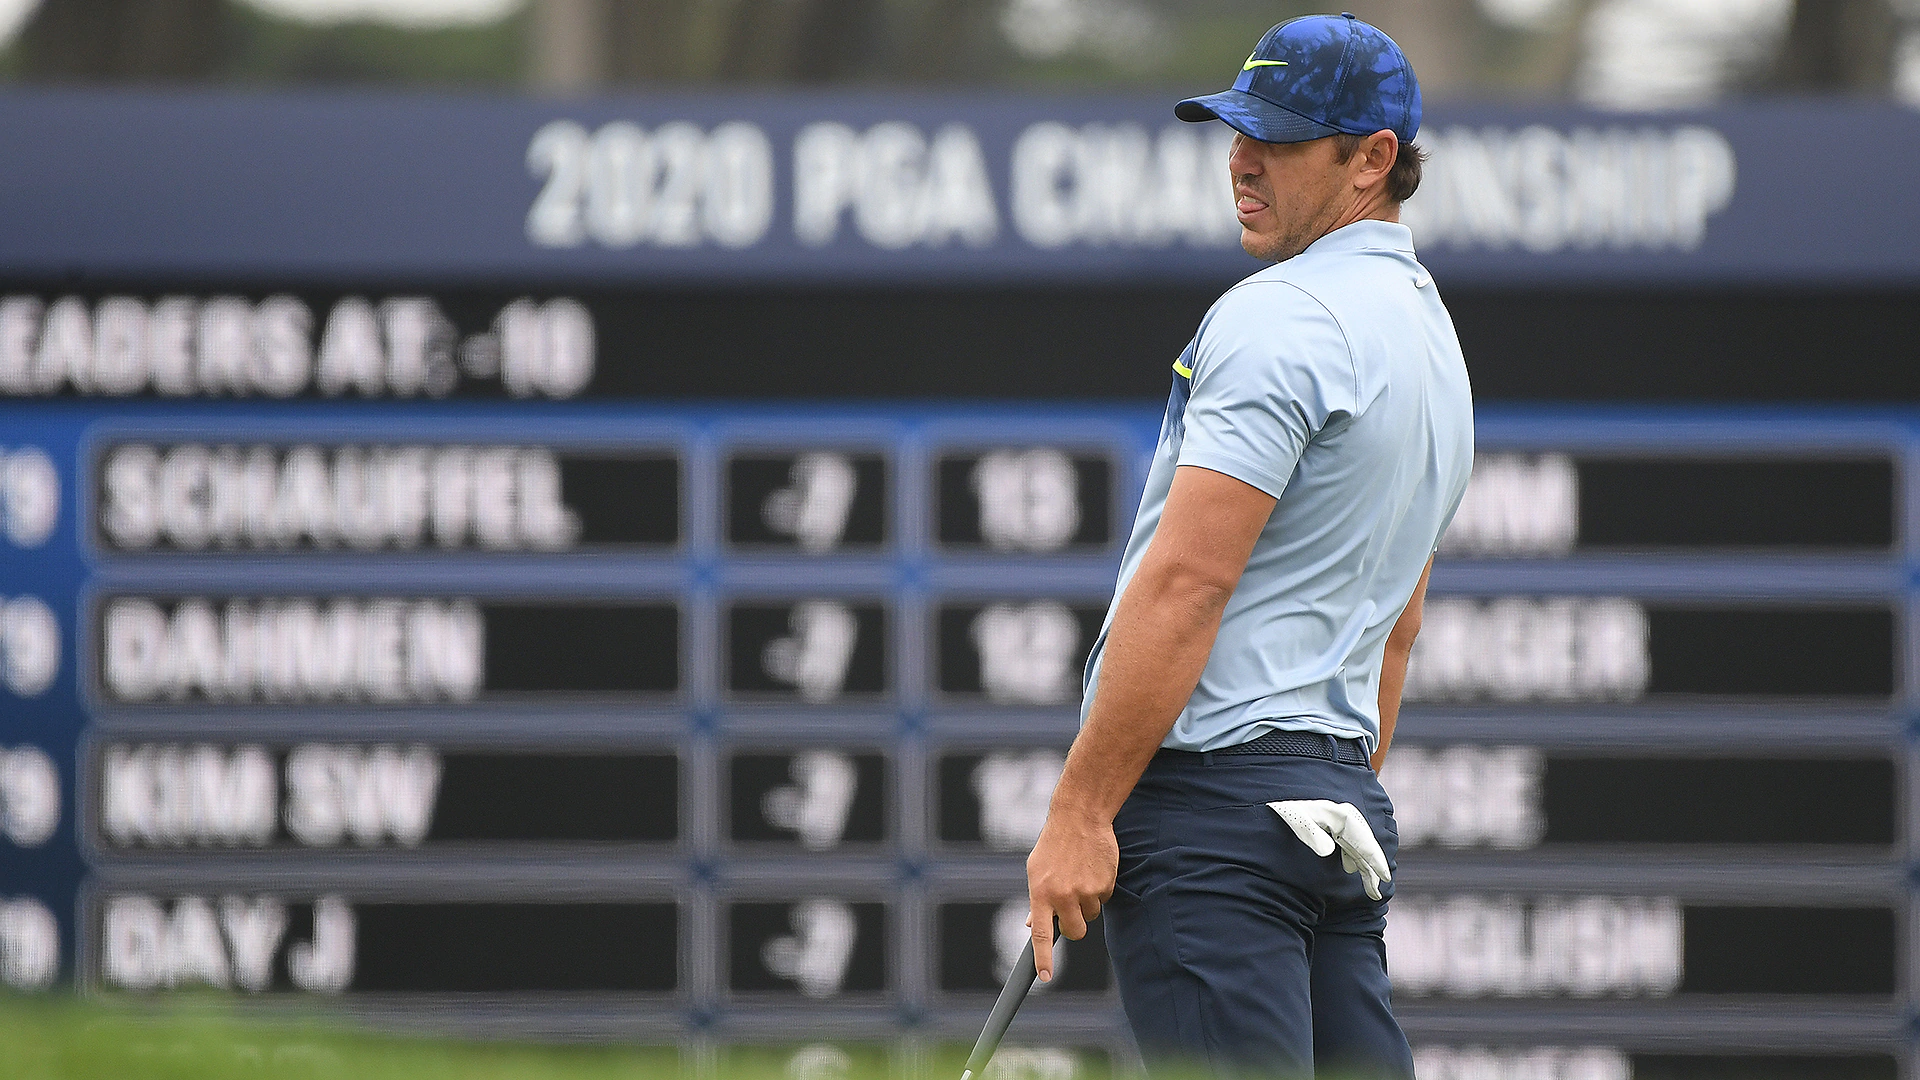 Report: Brooks Koepka regrets some of his words ahead of PGA final round